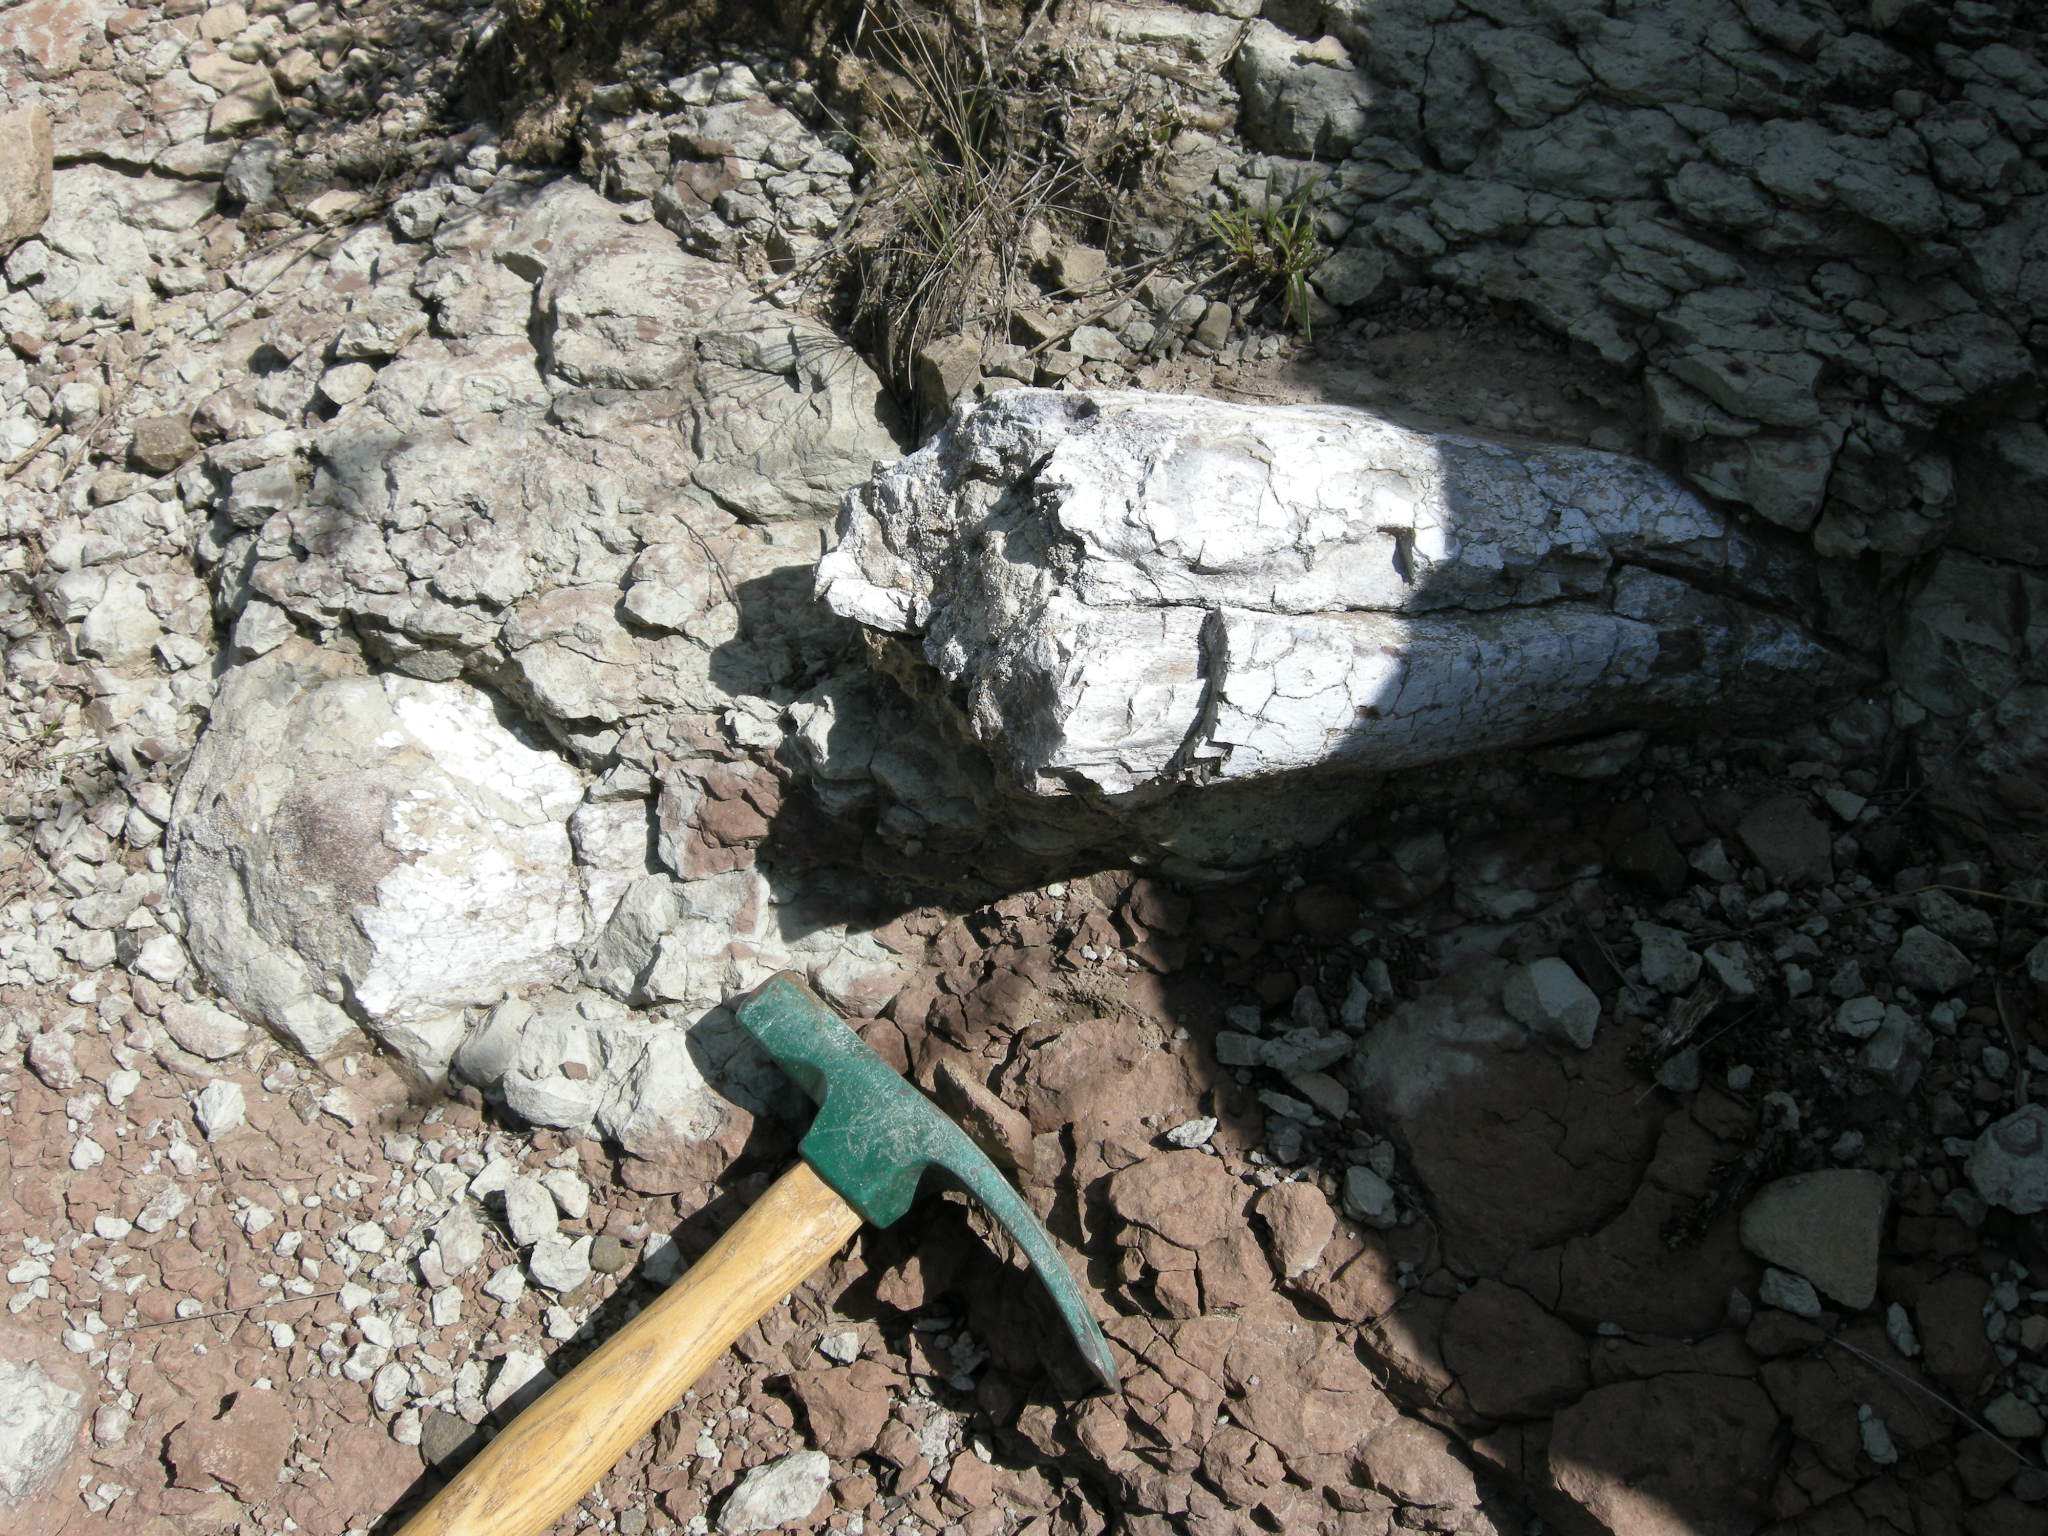 The large thigh bone (femur) protruding from the ground was the fossil that drew attention to this important dinosaur exposed in a road cutting along the R393 near the Barkley Pass. All of this exposed femur (35cm) was stolen on Wednesday 15th May